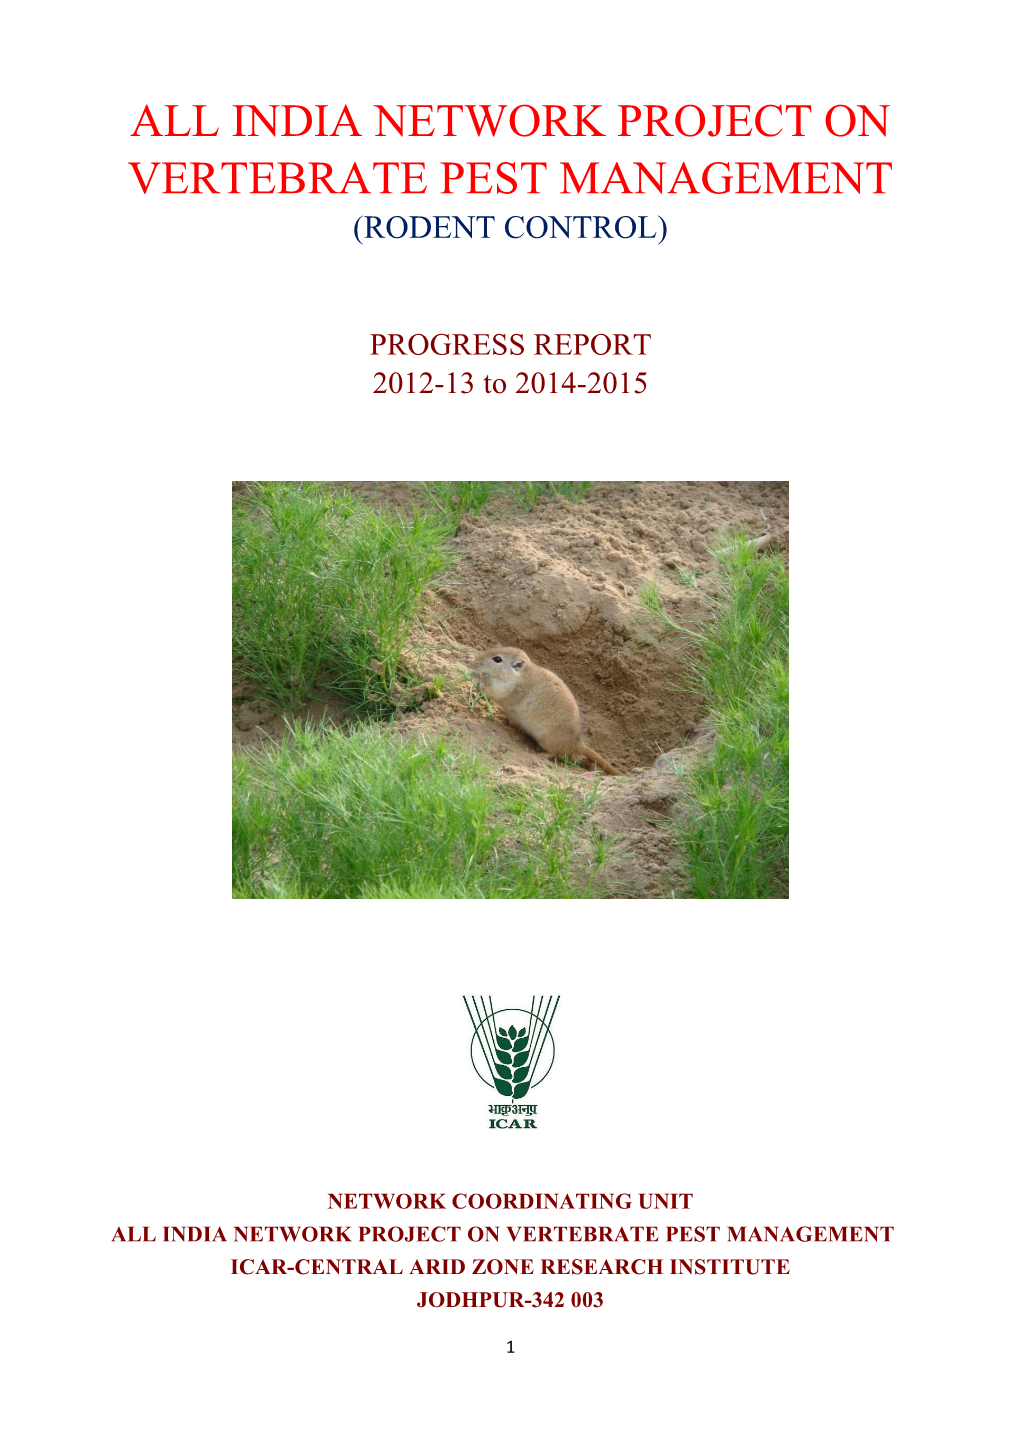 All India Network Project on Vertebrate Pest Management (Rodent Control)